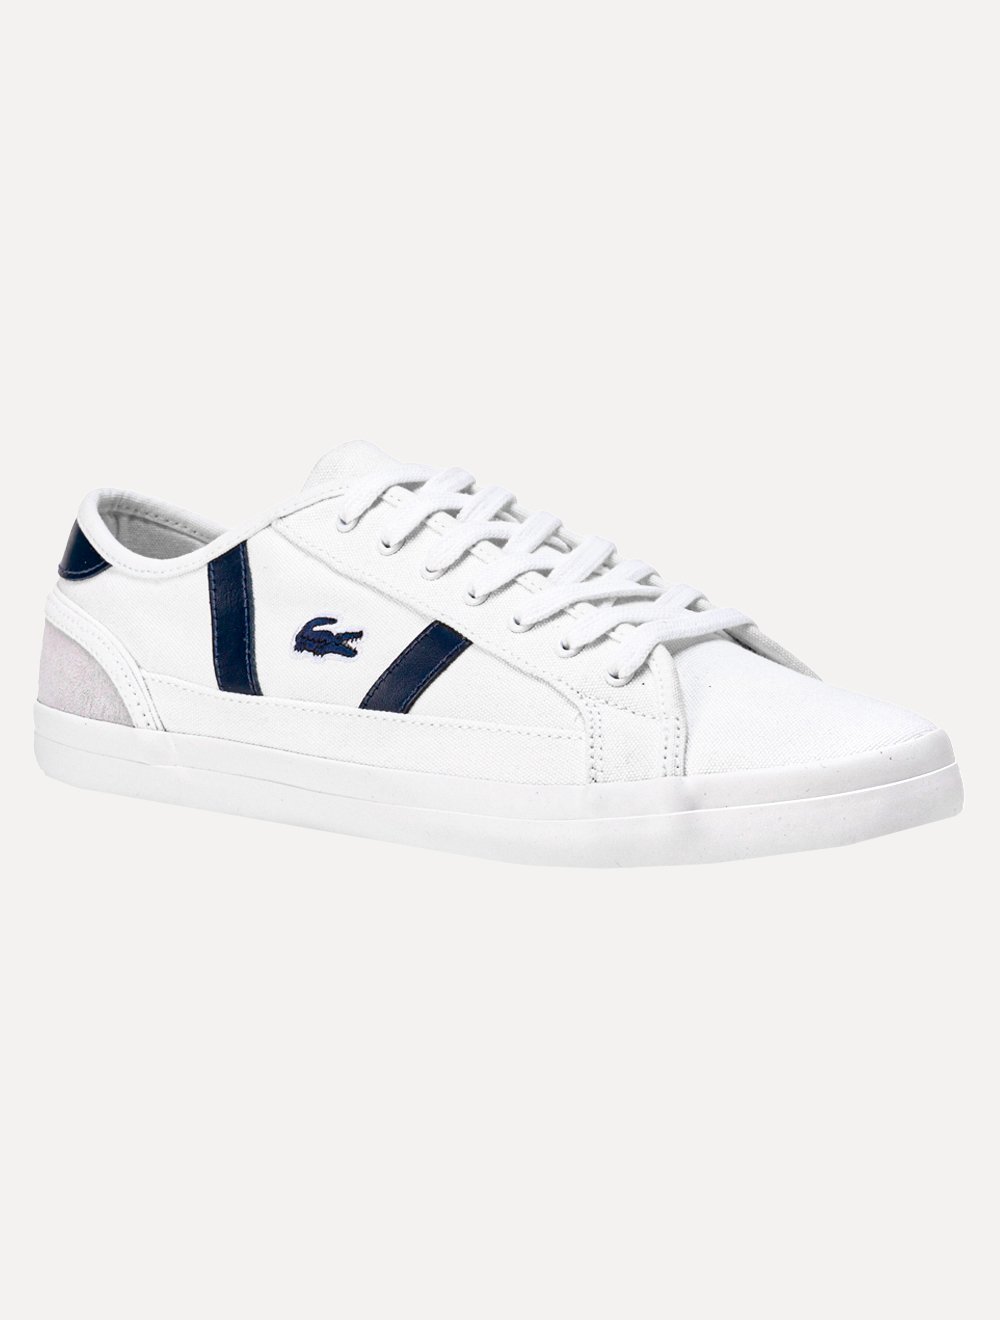 Tênis Lacoste Masculino Sideline Off Wht/Nvy Off-White